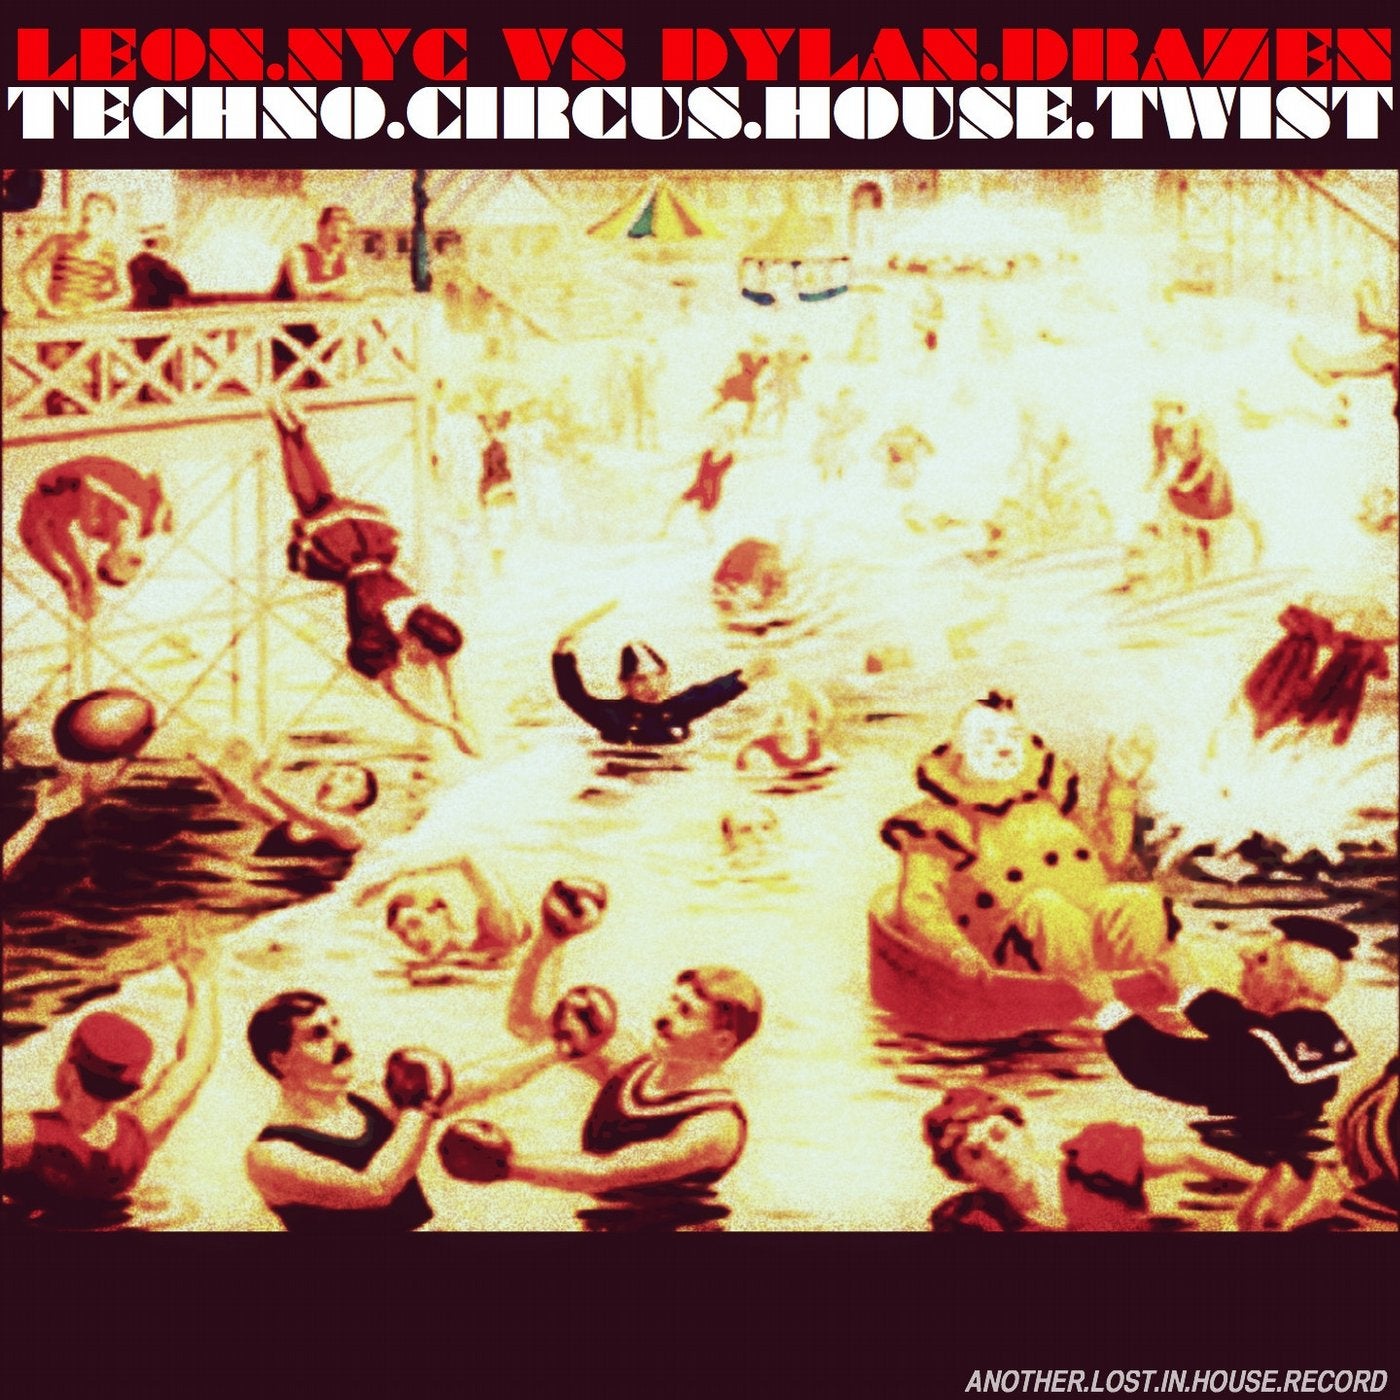 Techno.Circus.House.Twist (Leon NYC Vs Dylan Drazen Lost In House Take)